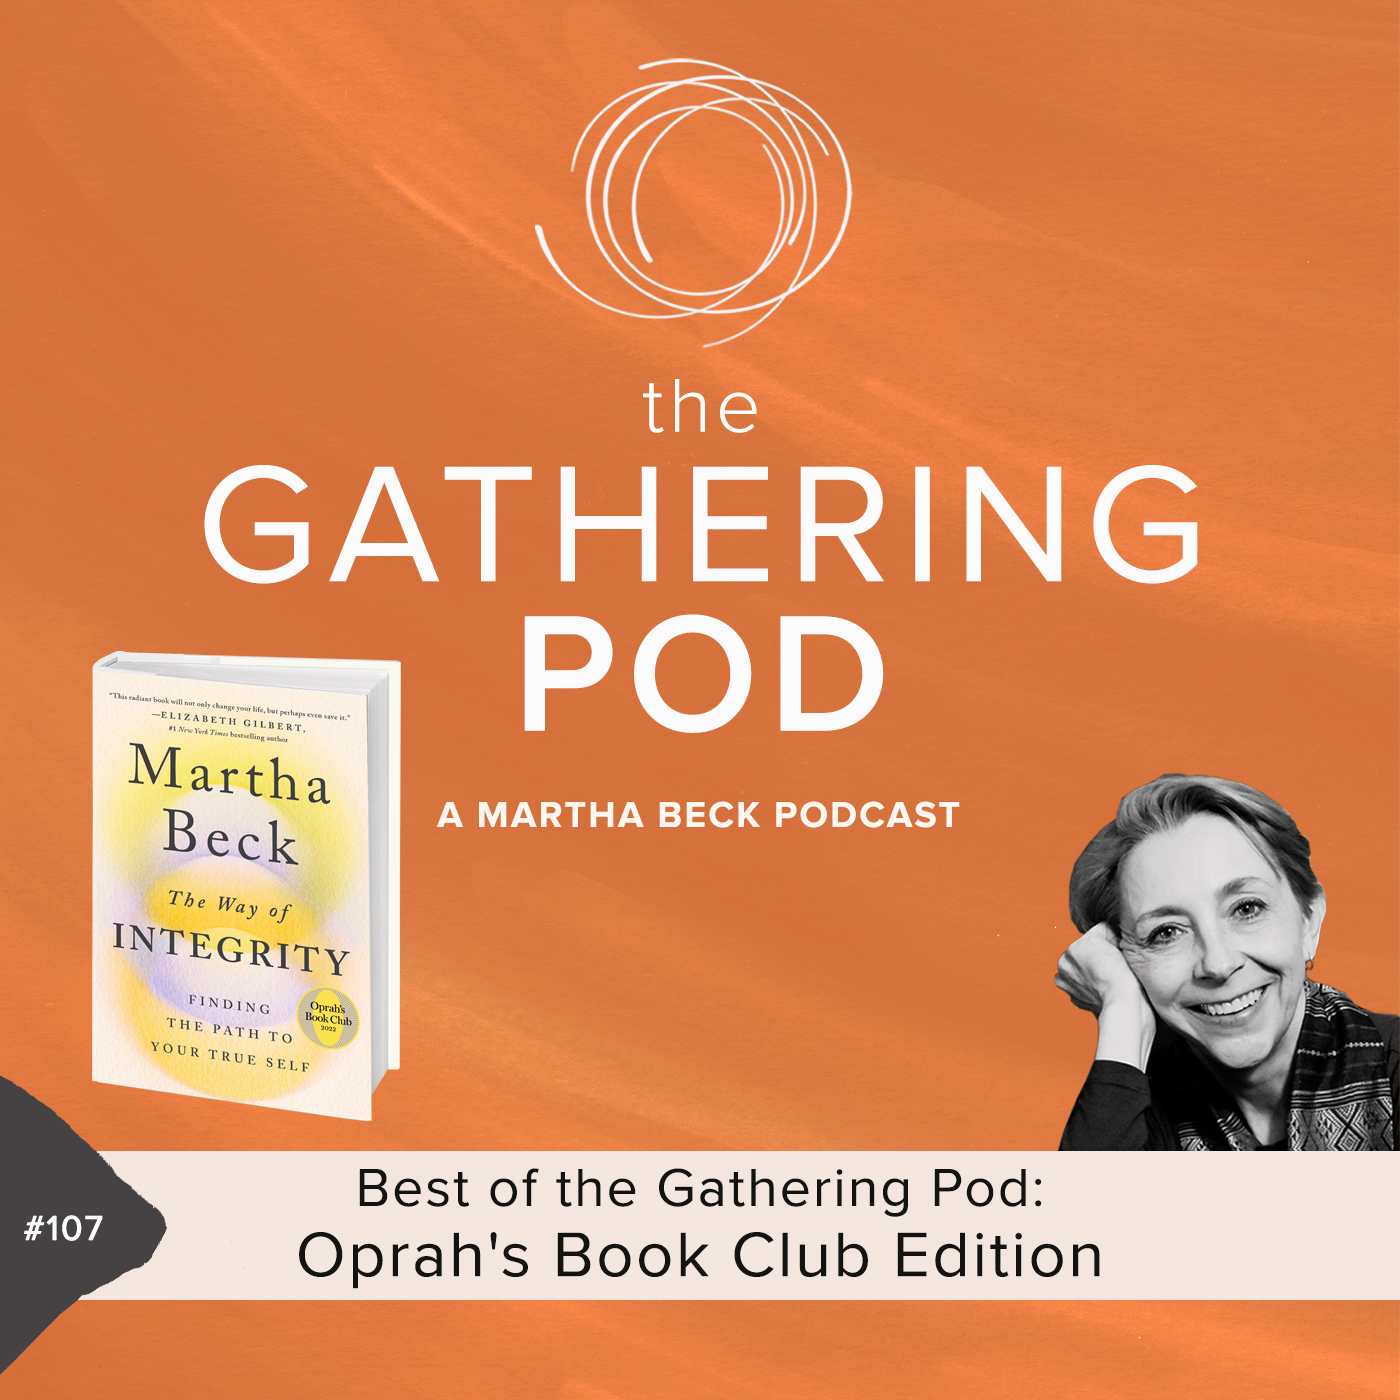 Best of The Gathering Pod: Oprah's Book Club Edition